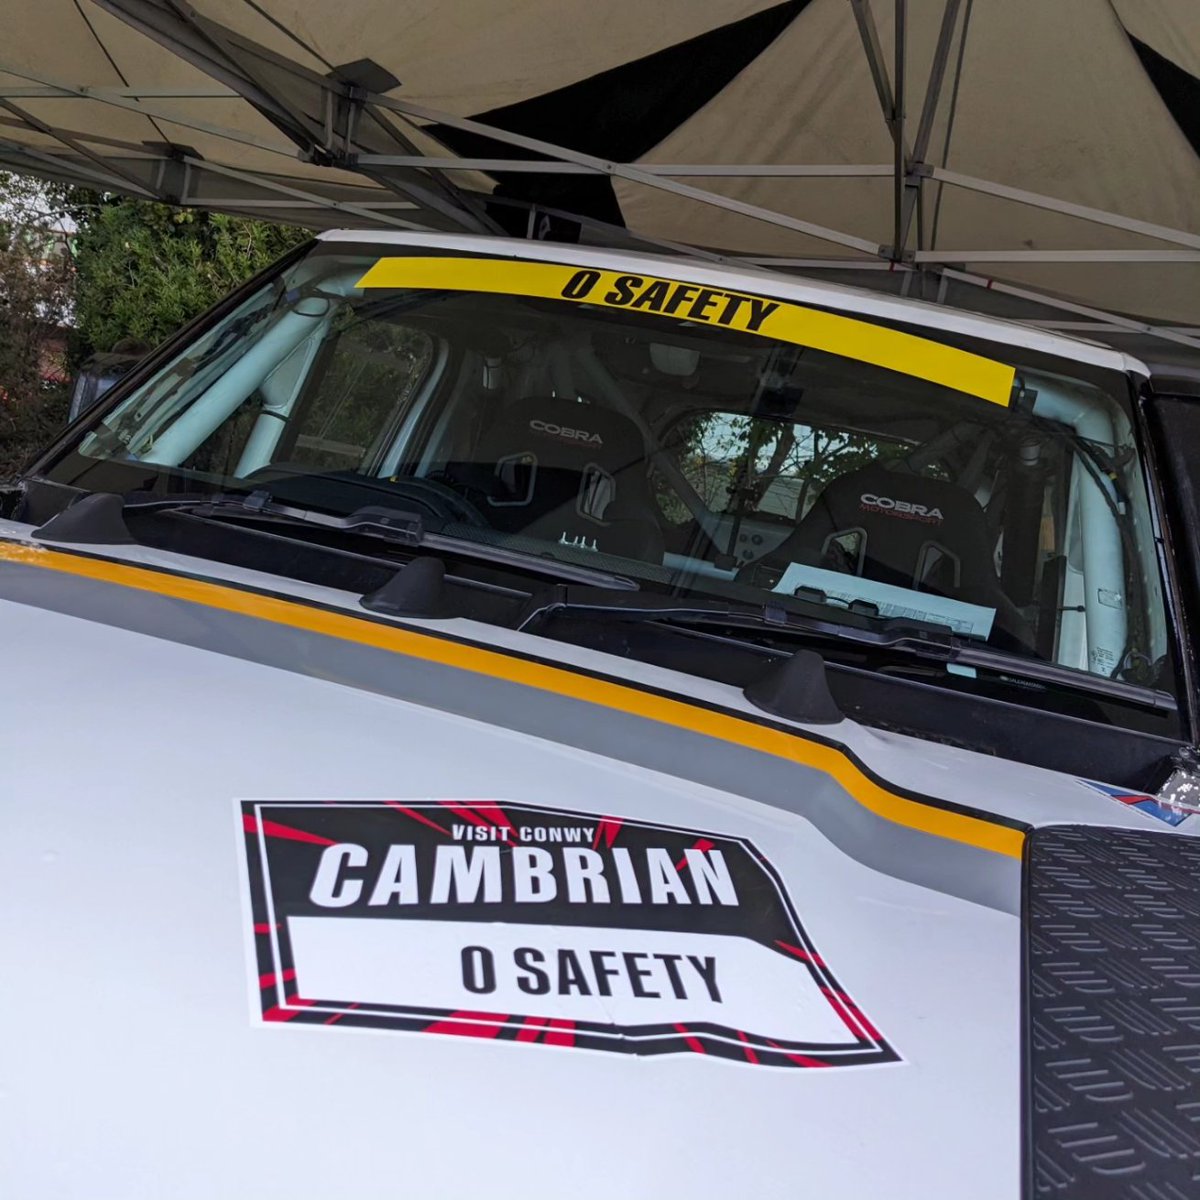 We are ready! All set for the @CambrianRally aboard the @bowlermotors Defender Challenge rally car. It's been a mammoth effort from the team over the past weeks/months. It's all worth it.